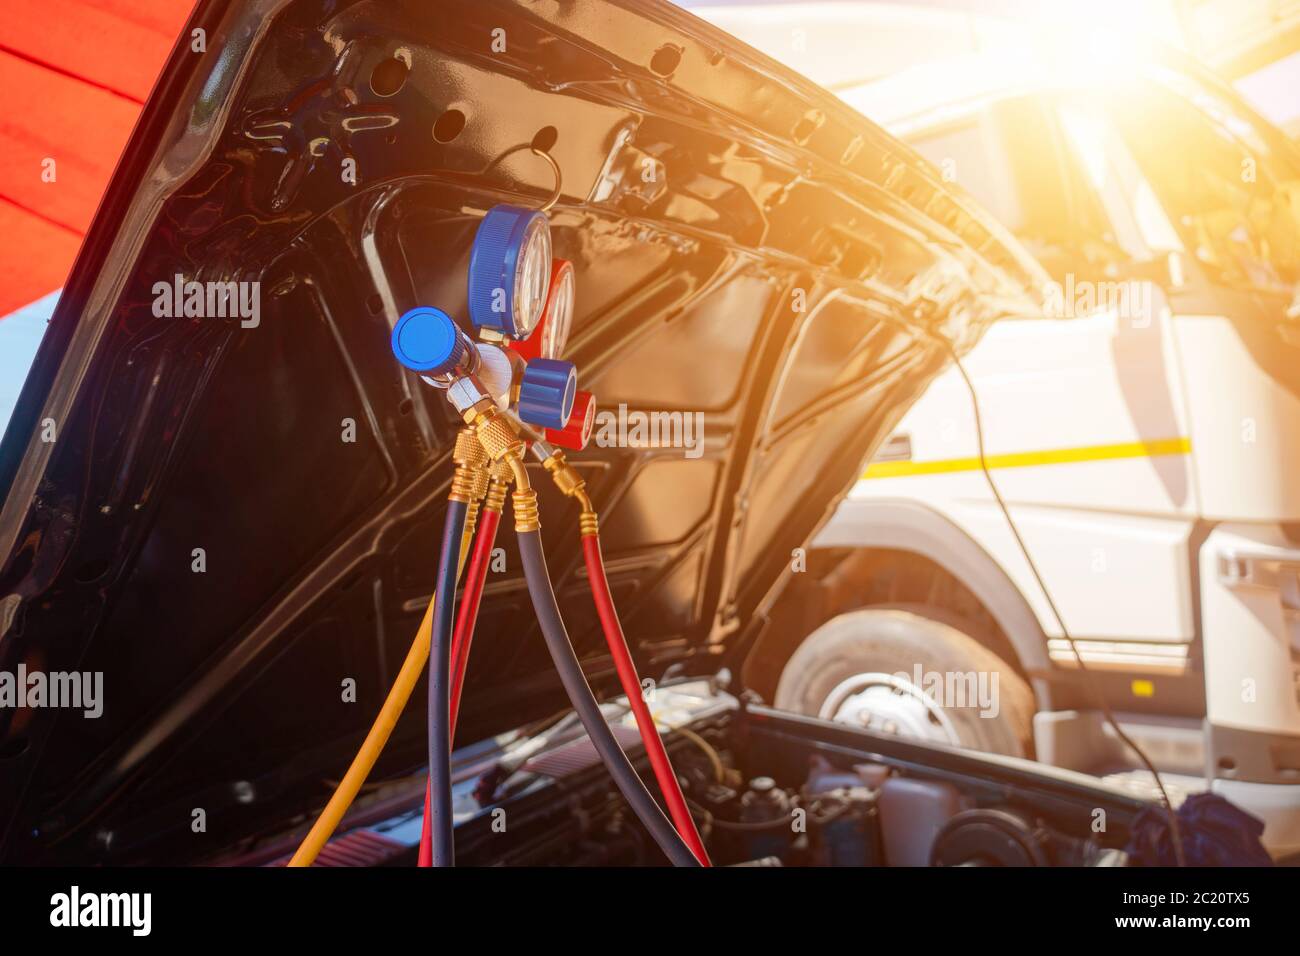 Set gauge, air cleaners, and auto maintenance. Stock Photo